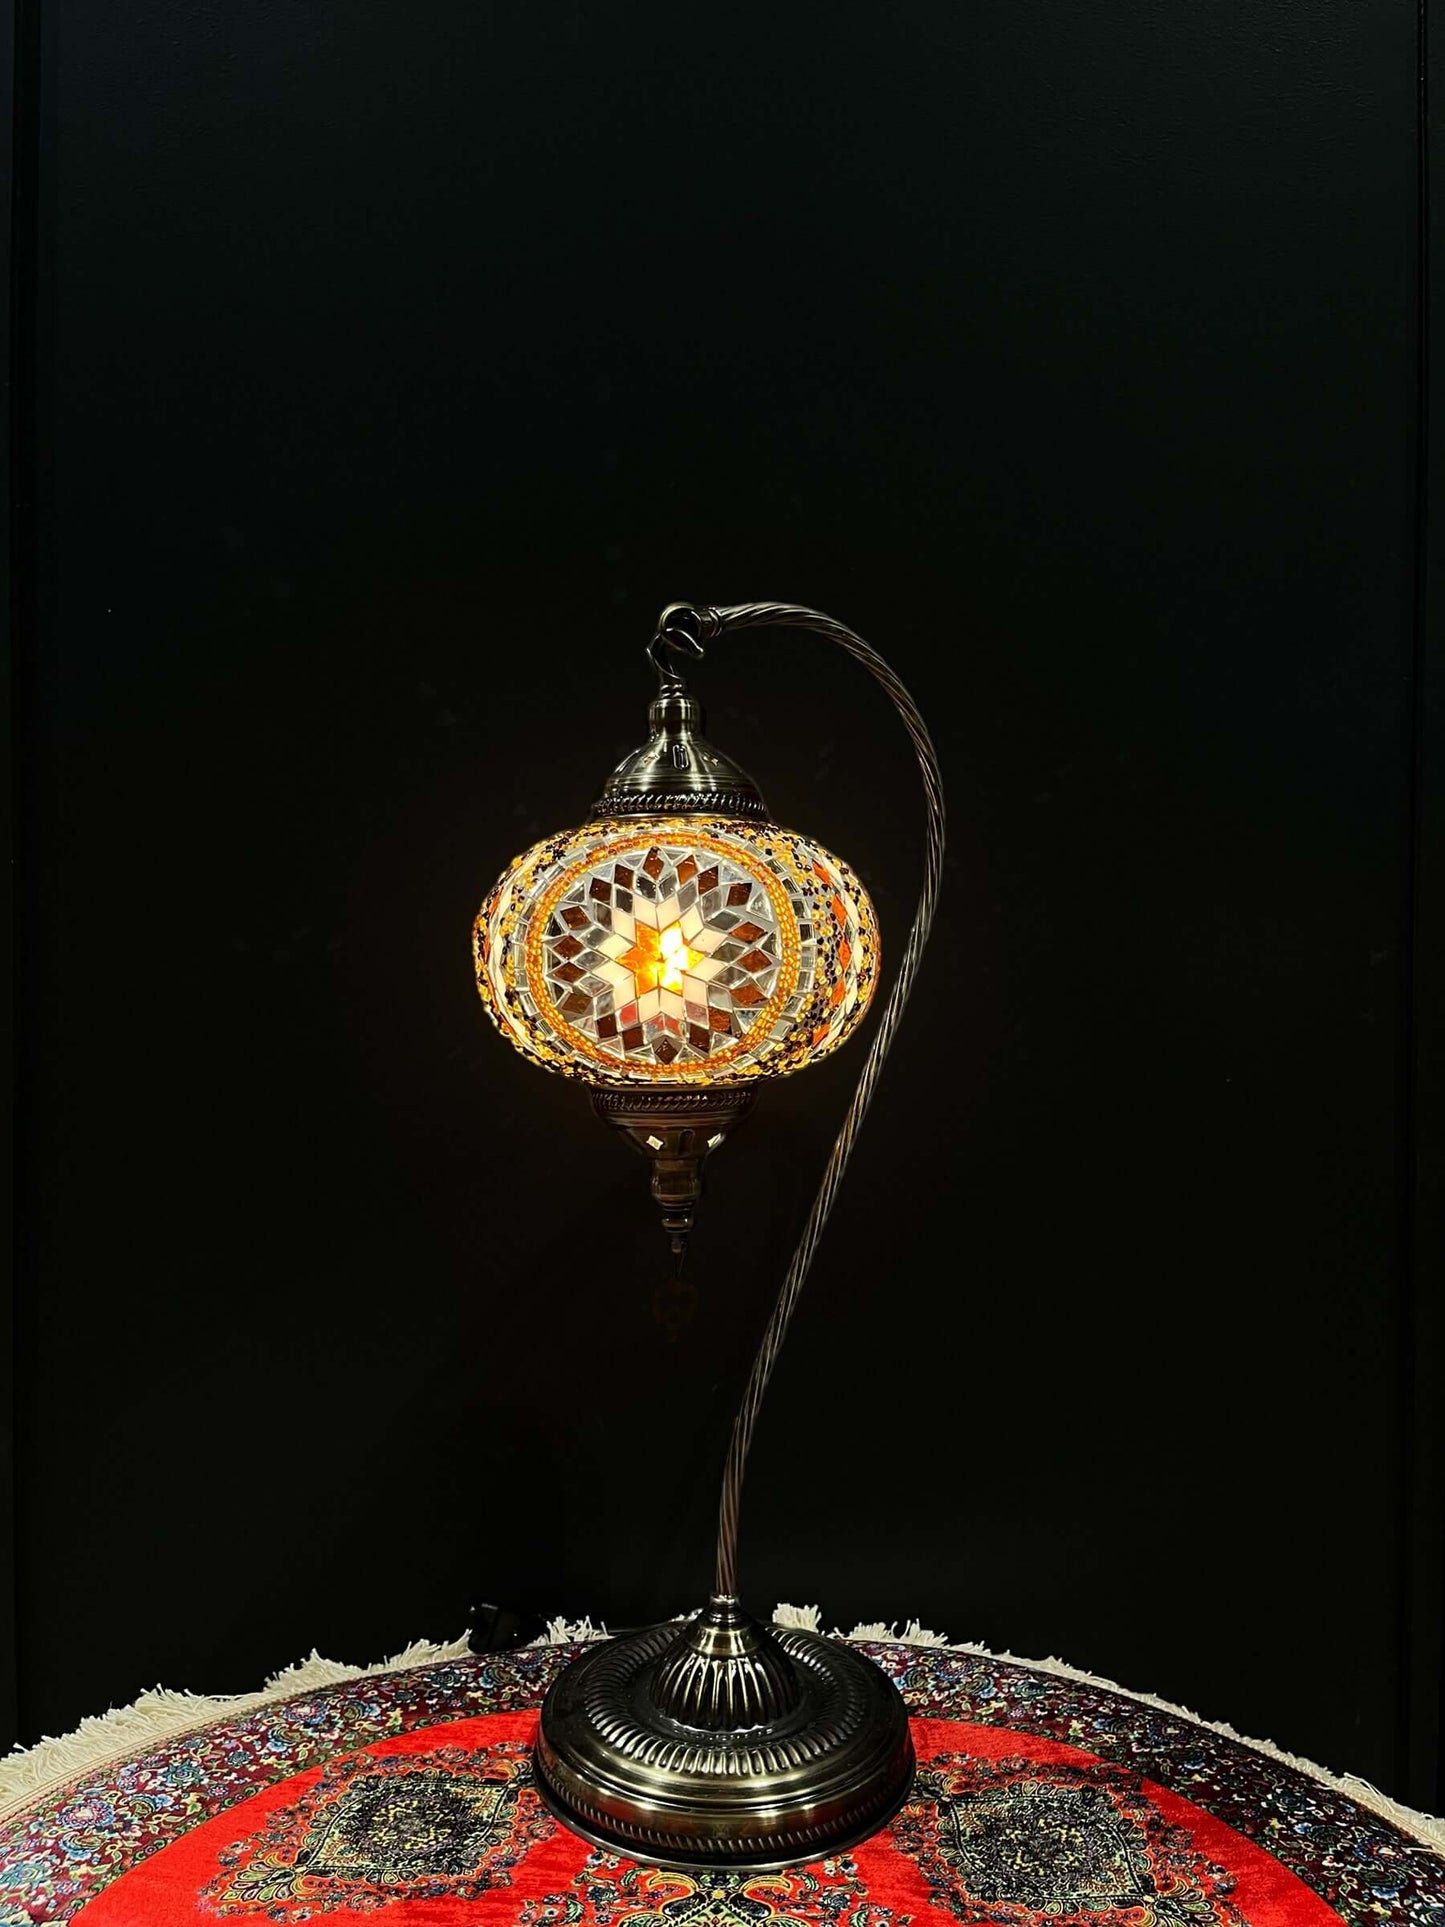 A mosaic lamp, also known as a Turkish lamps, is a decorative lighting fixture with intricate designs and colorful glass pieces.